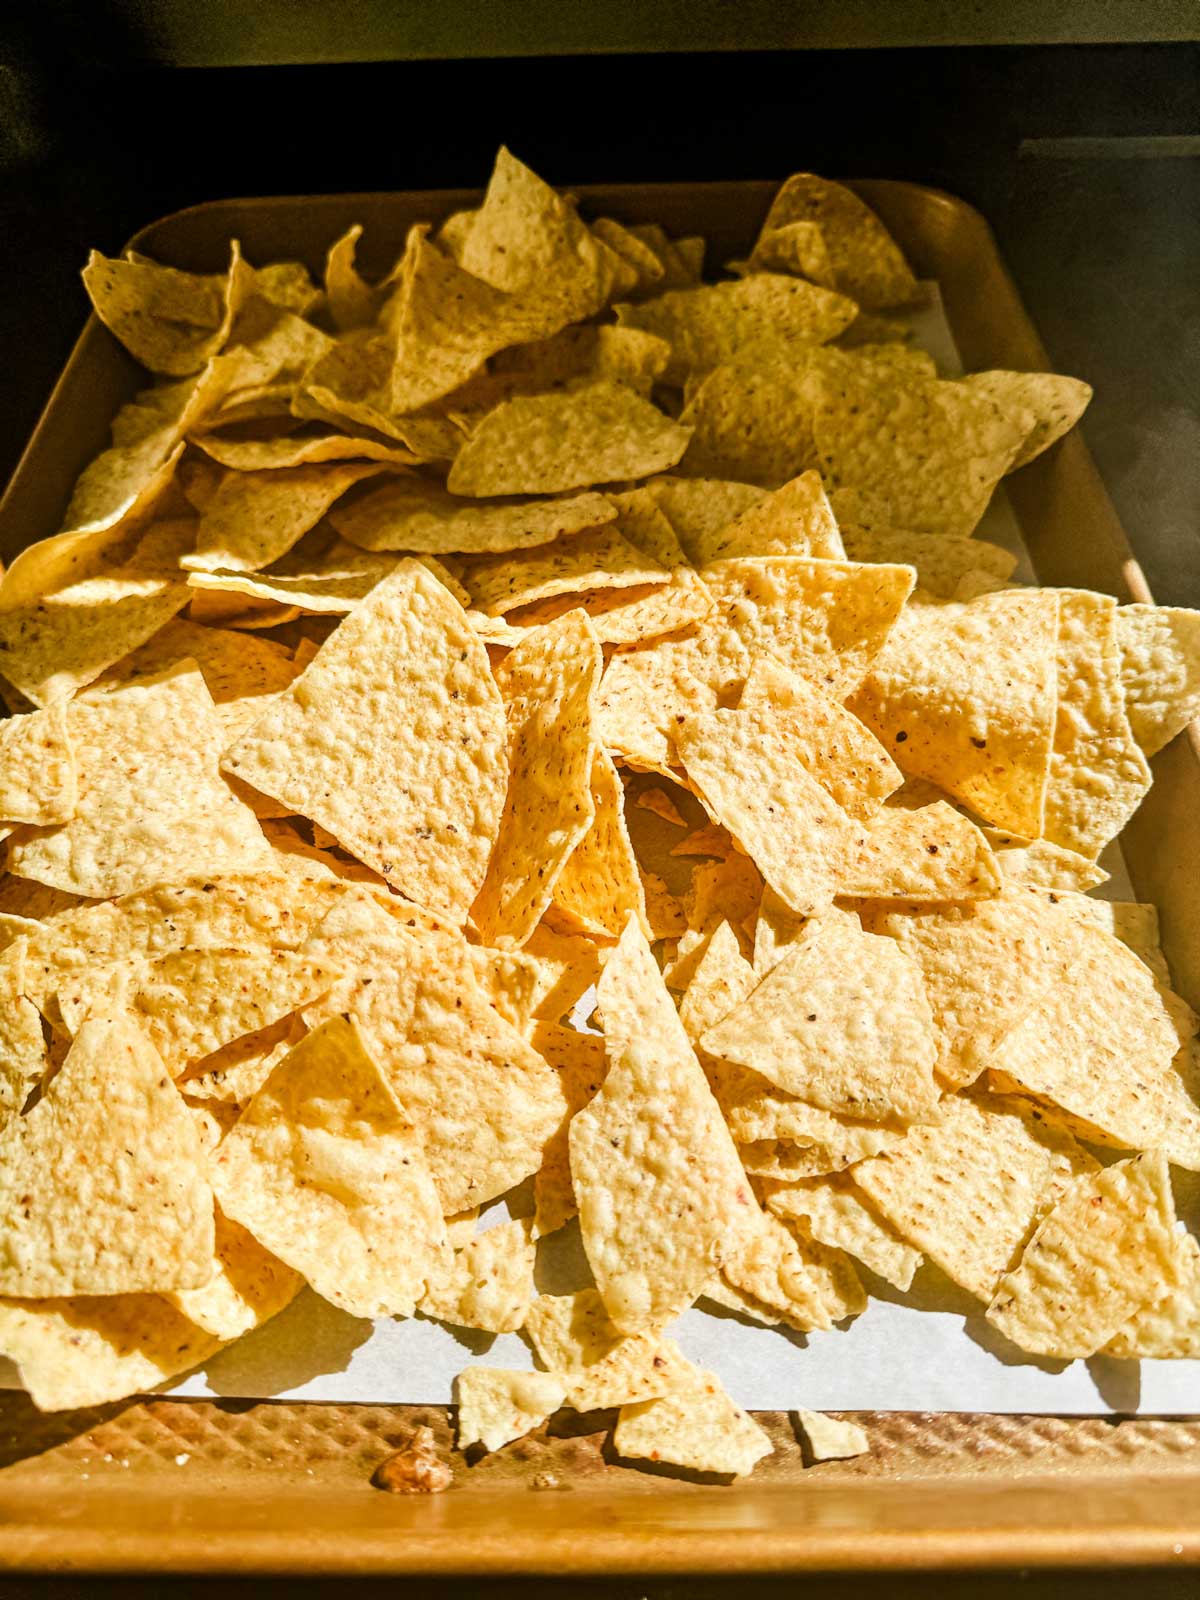 Tortilla chips on a parchment lined baking sheet.